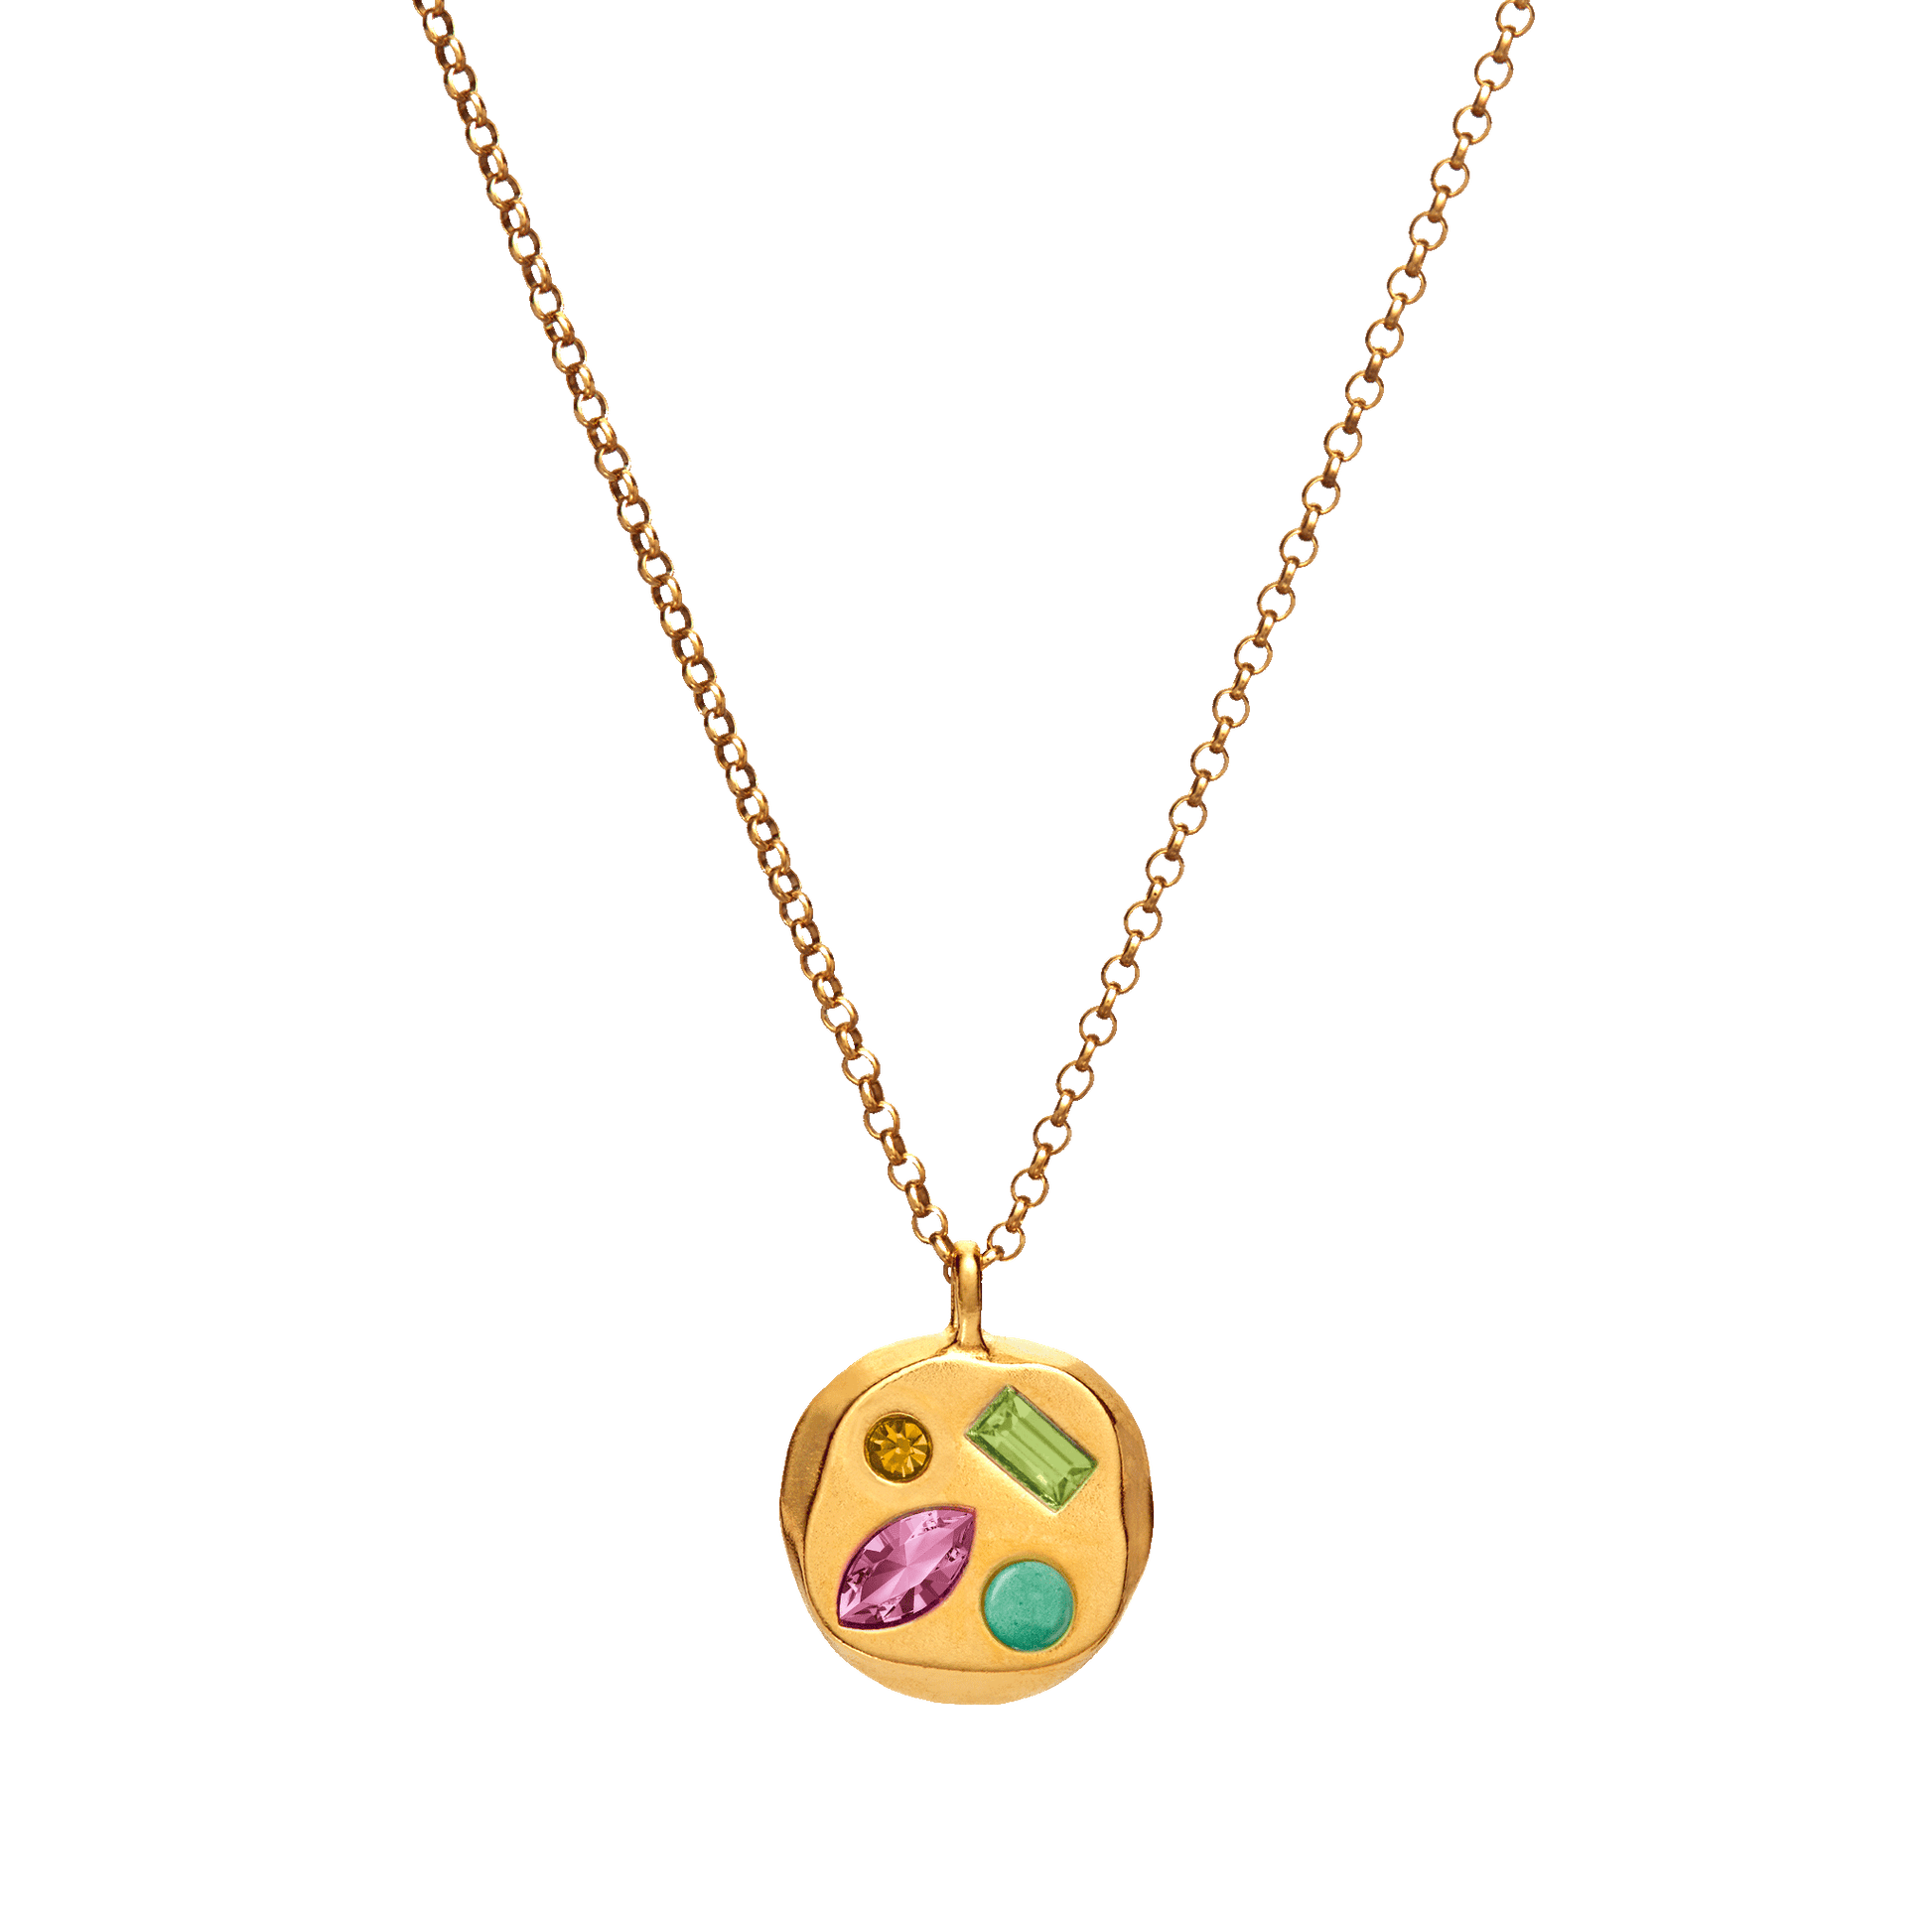 The October Tenth Pendant